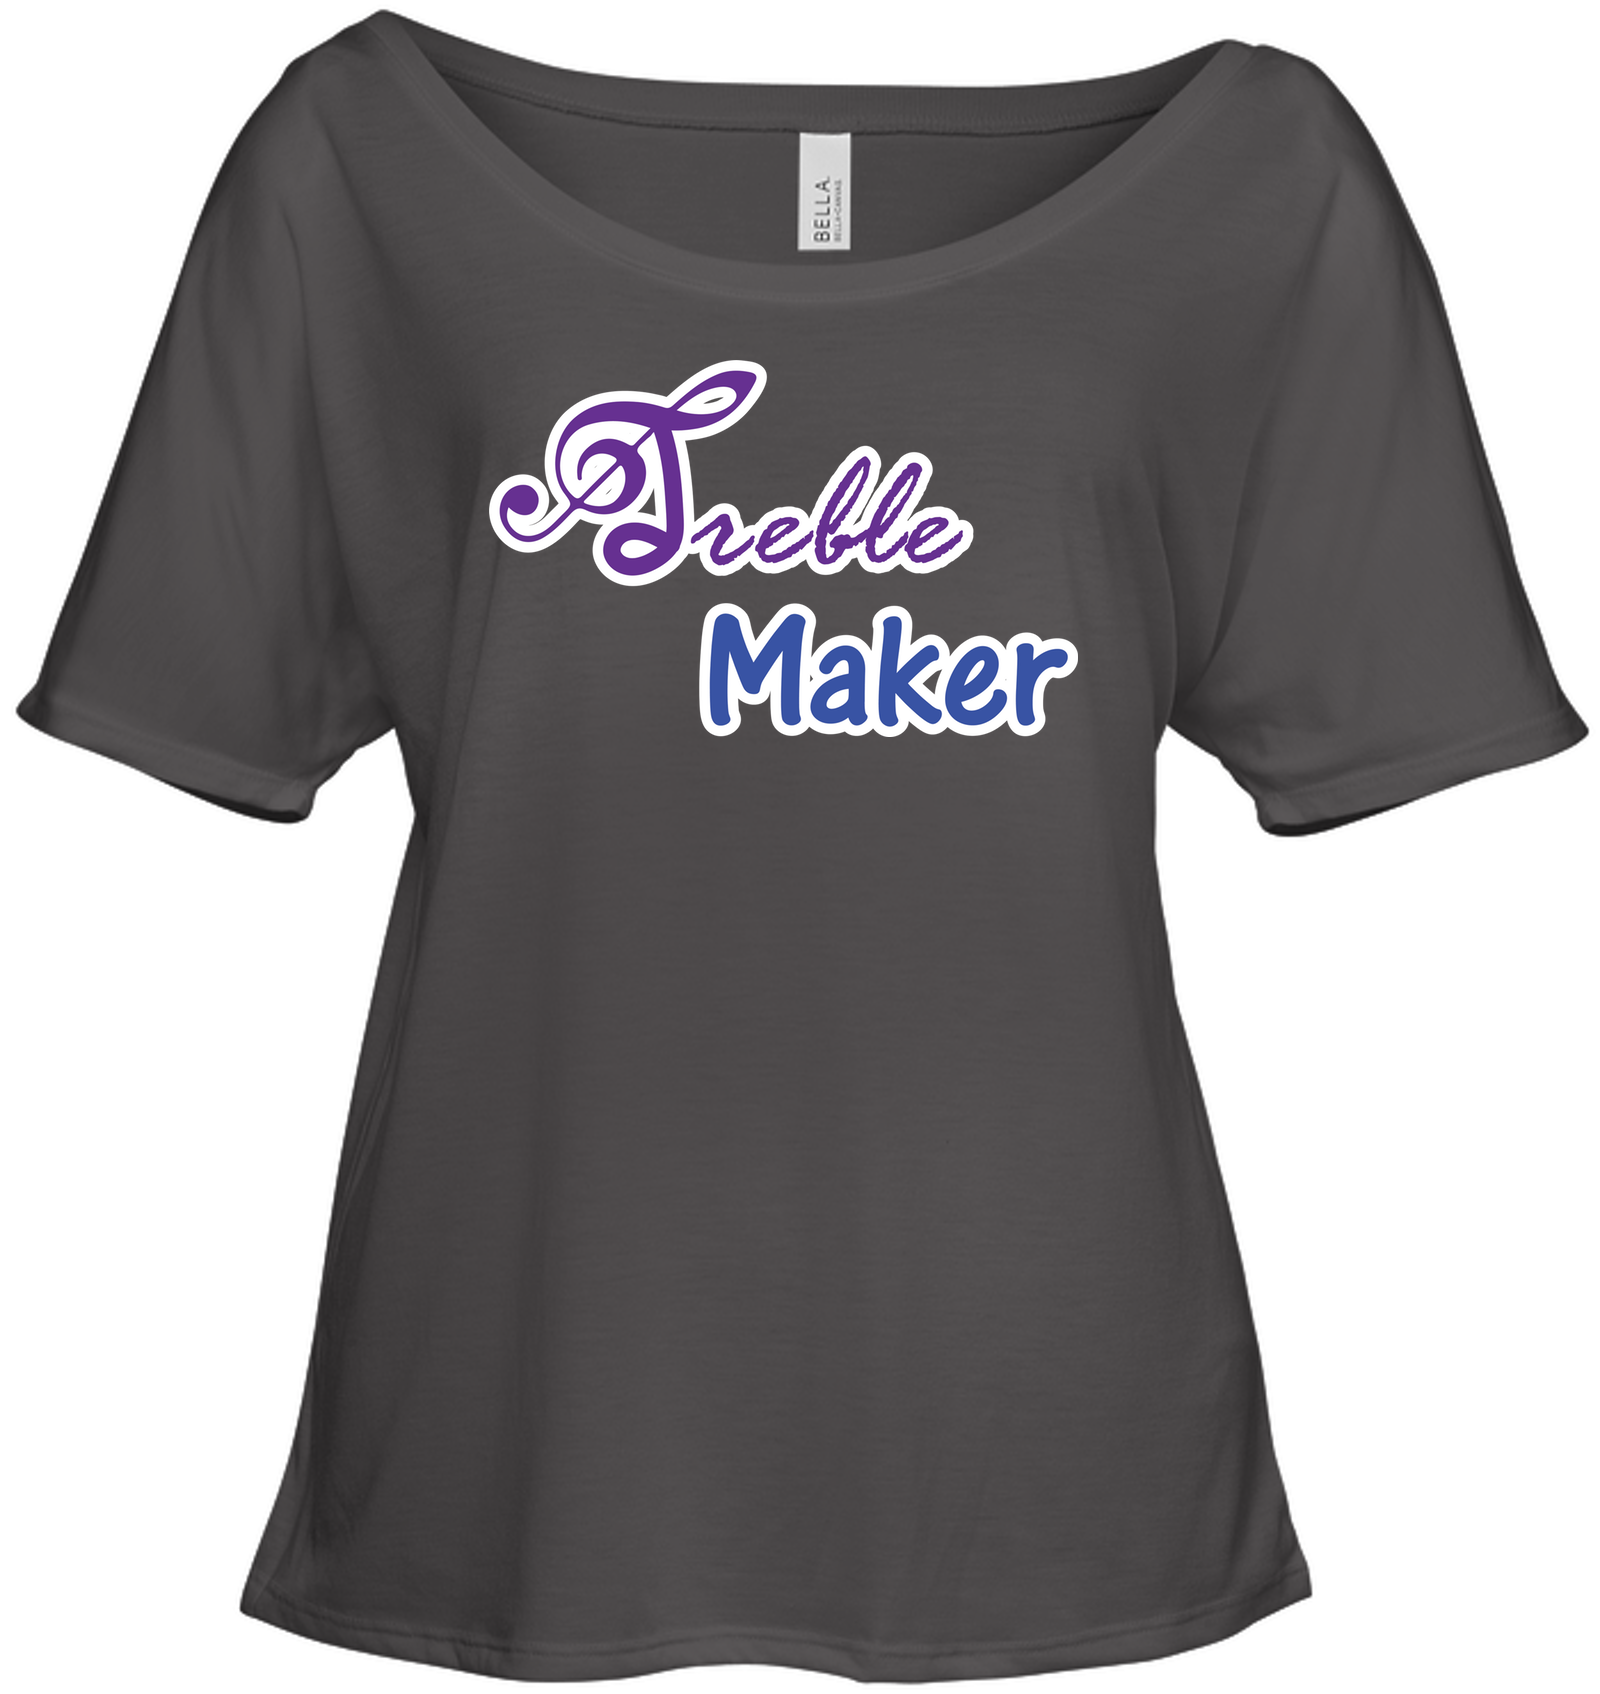 Treble Maker plain and simple - Bella + Canvas Women's Slouchy Tee